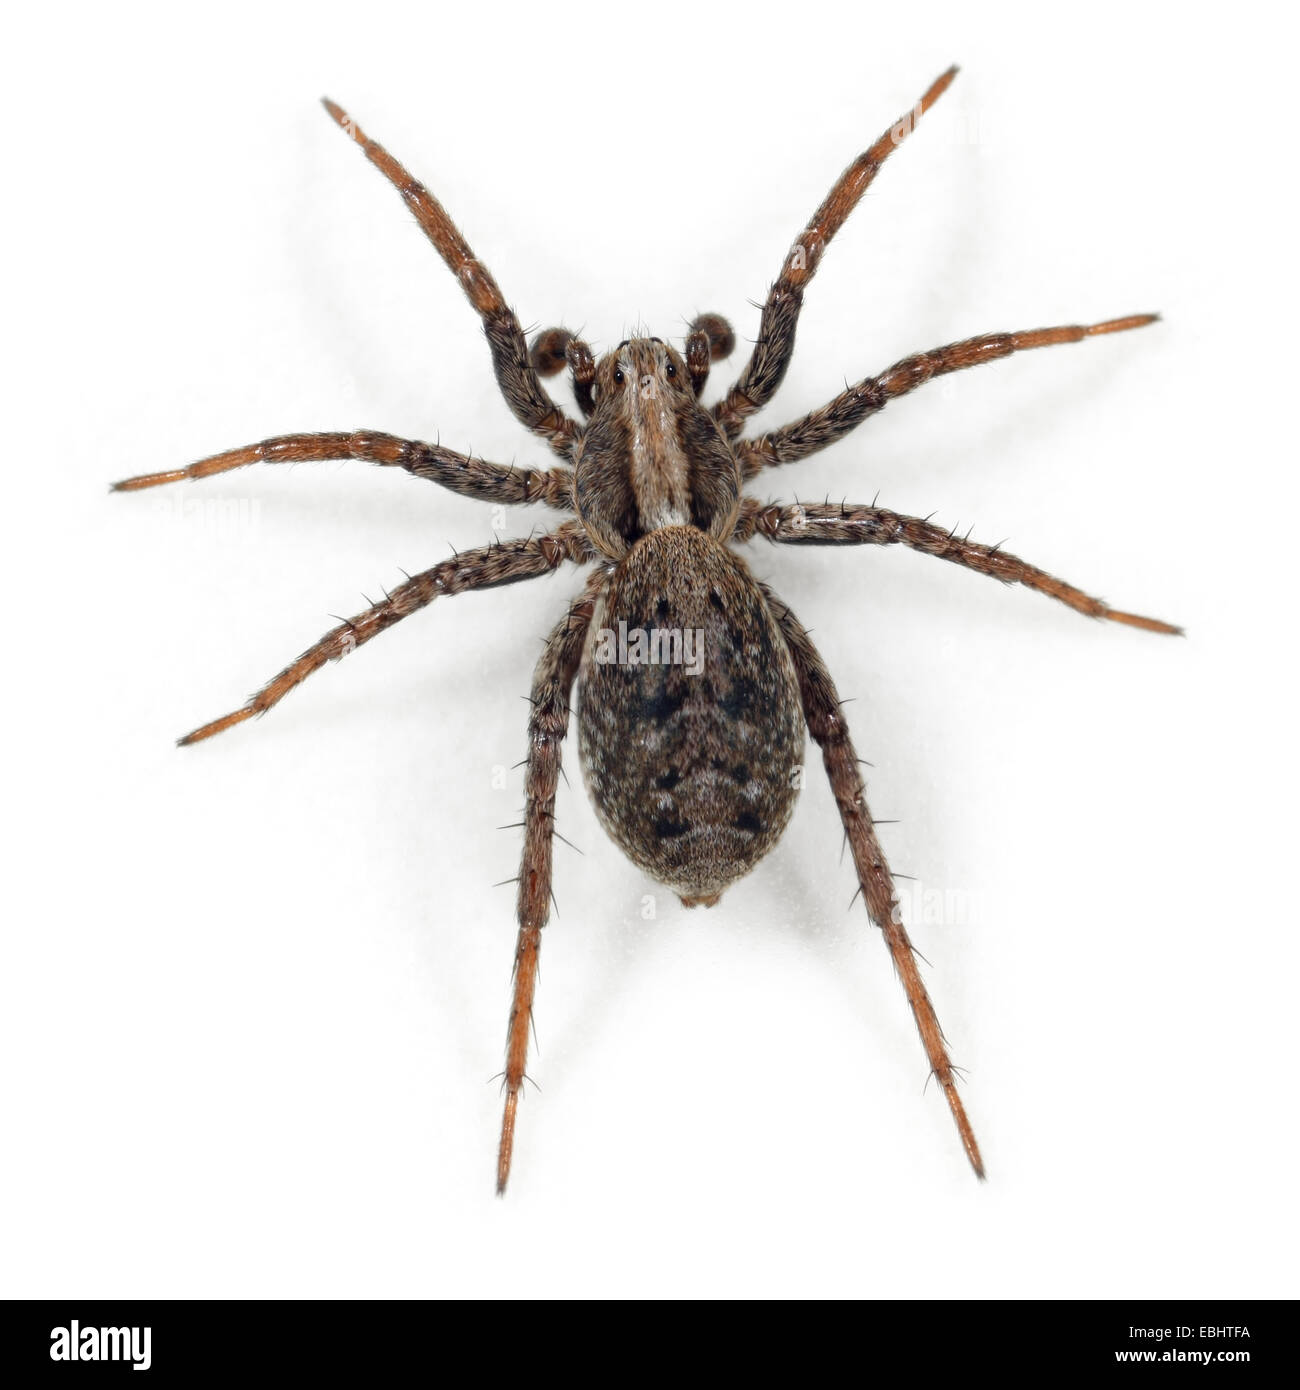 A subadult male Dune Wolf Spider (Xerolycosa miniata), on a white background, part of the family Lycosidae - Wolf spiders. Stock Photo